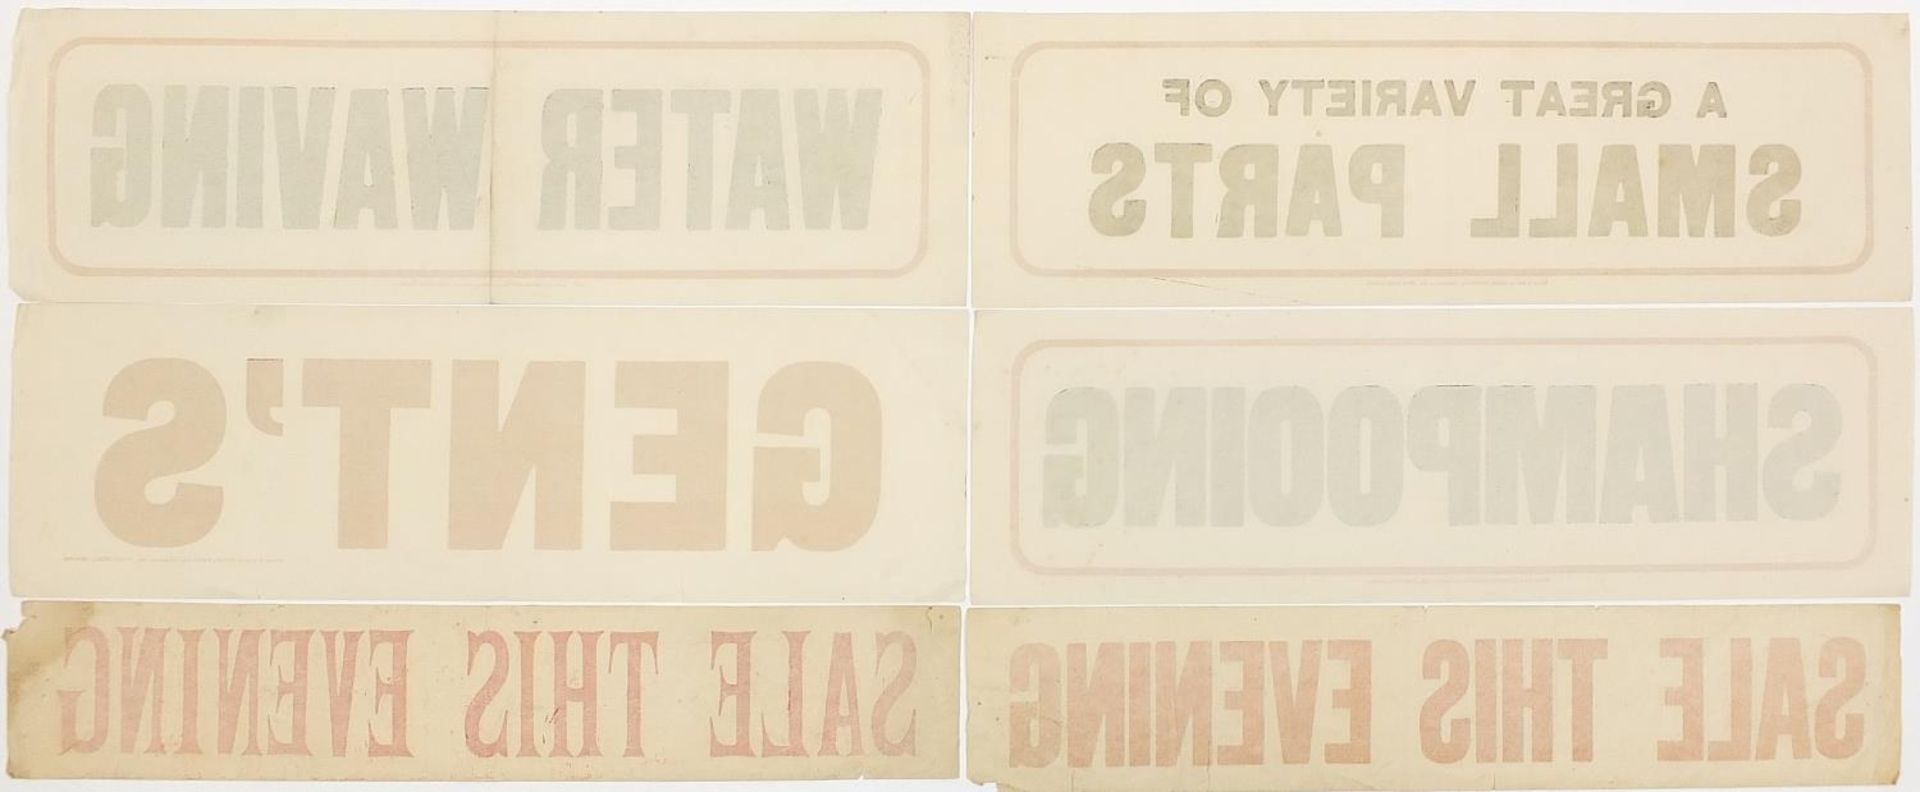 Four vintage lithographic shop advertising signs printed and sold by Samuel Reeves Ltd of Kings - Image 2 of 3